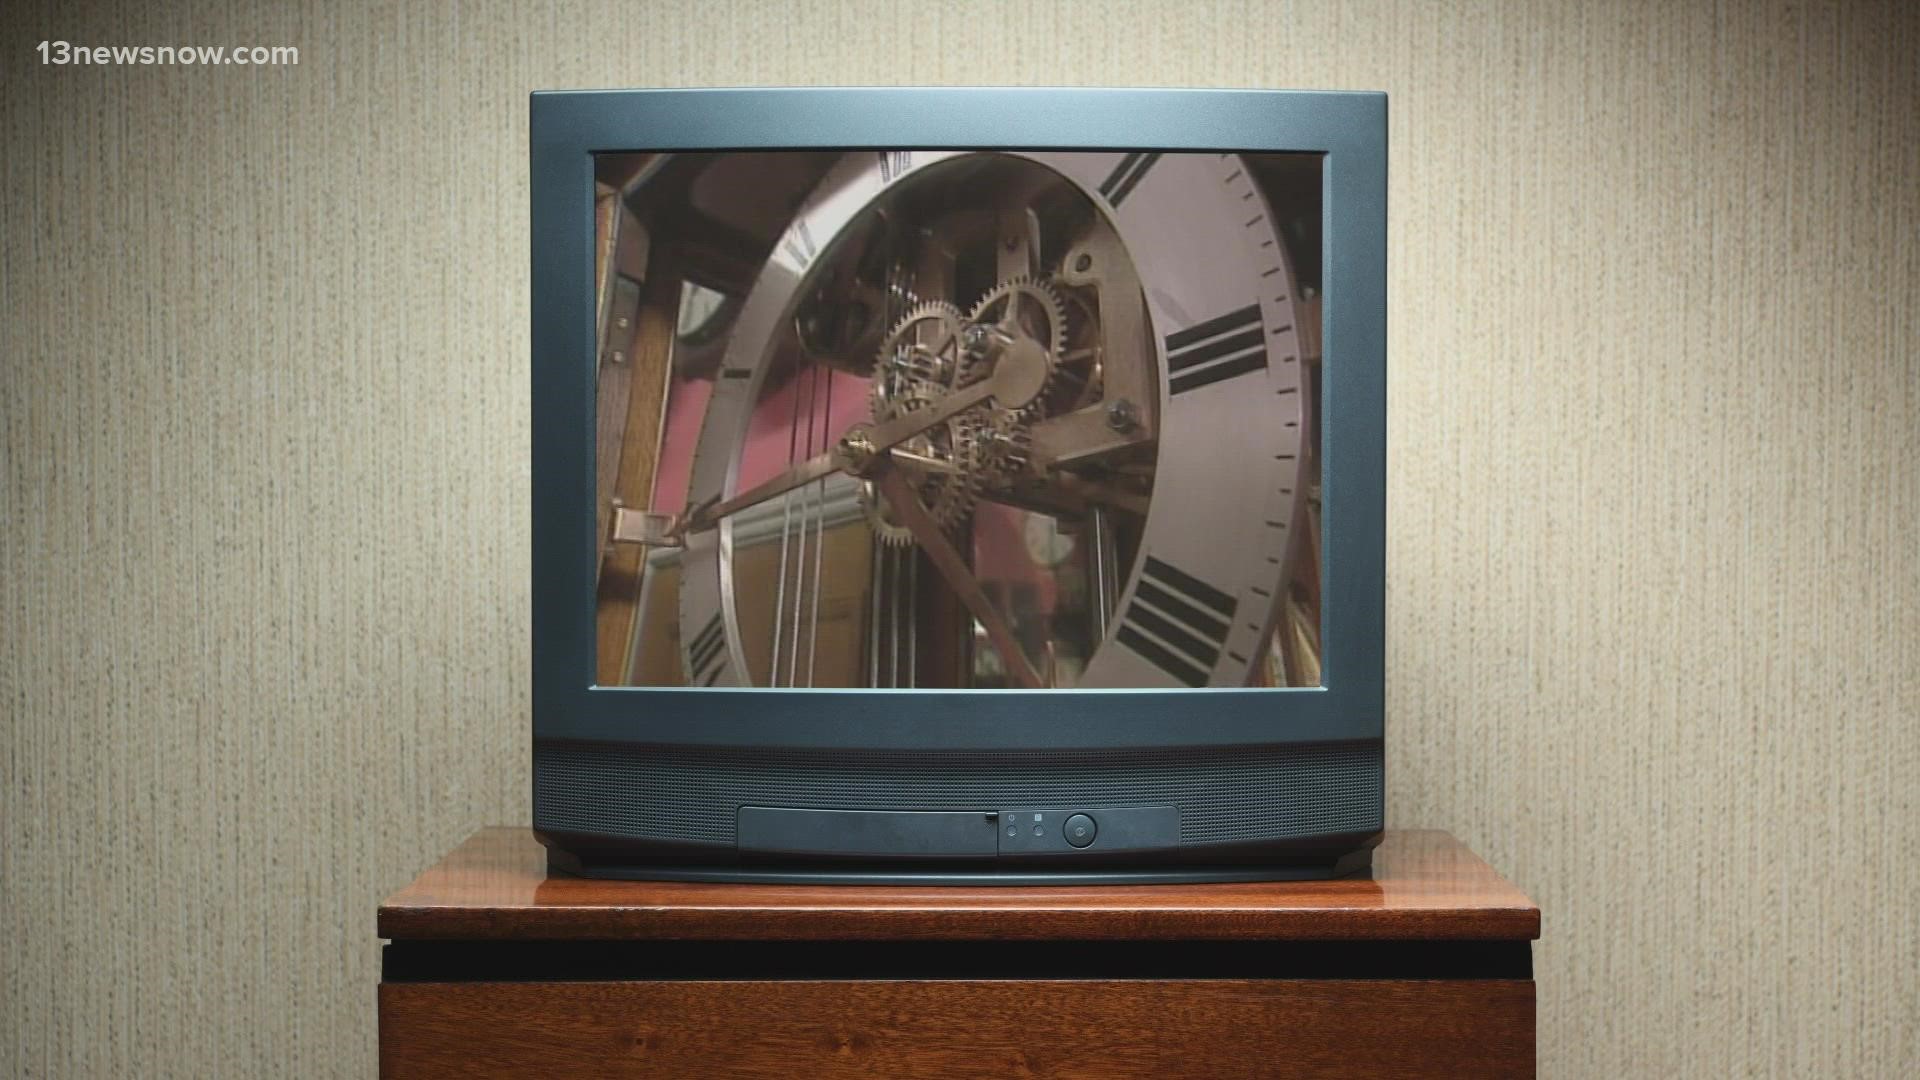 Before smartphones and computer automation, the practice of turning clocks forward and back was a bit more tedious.